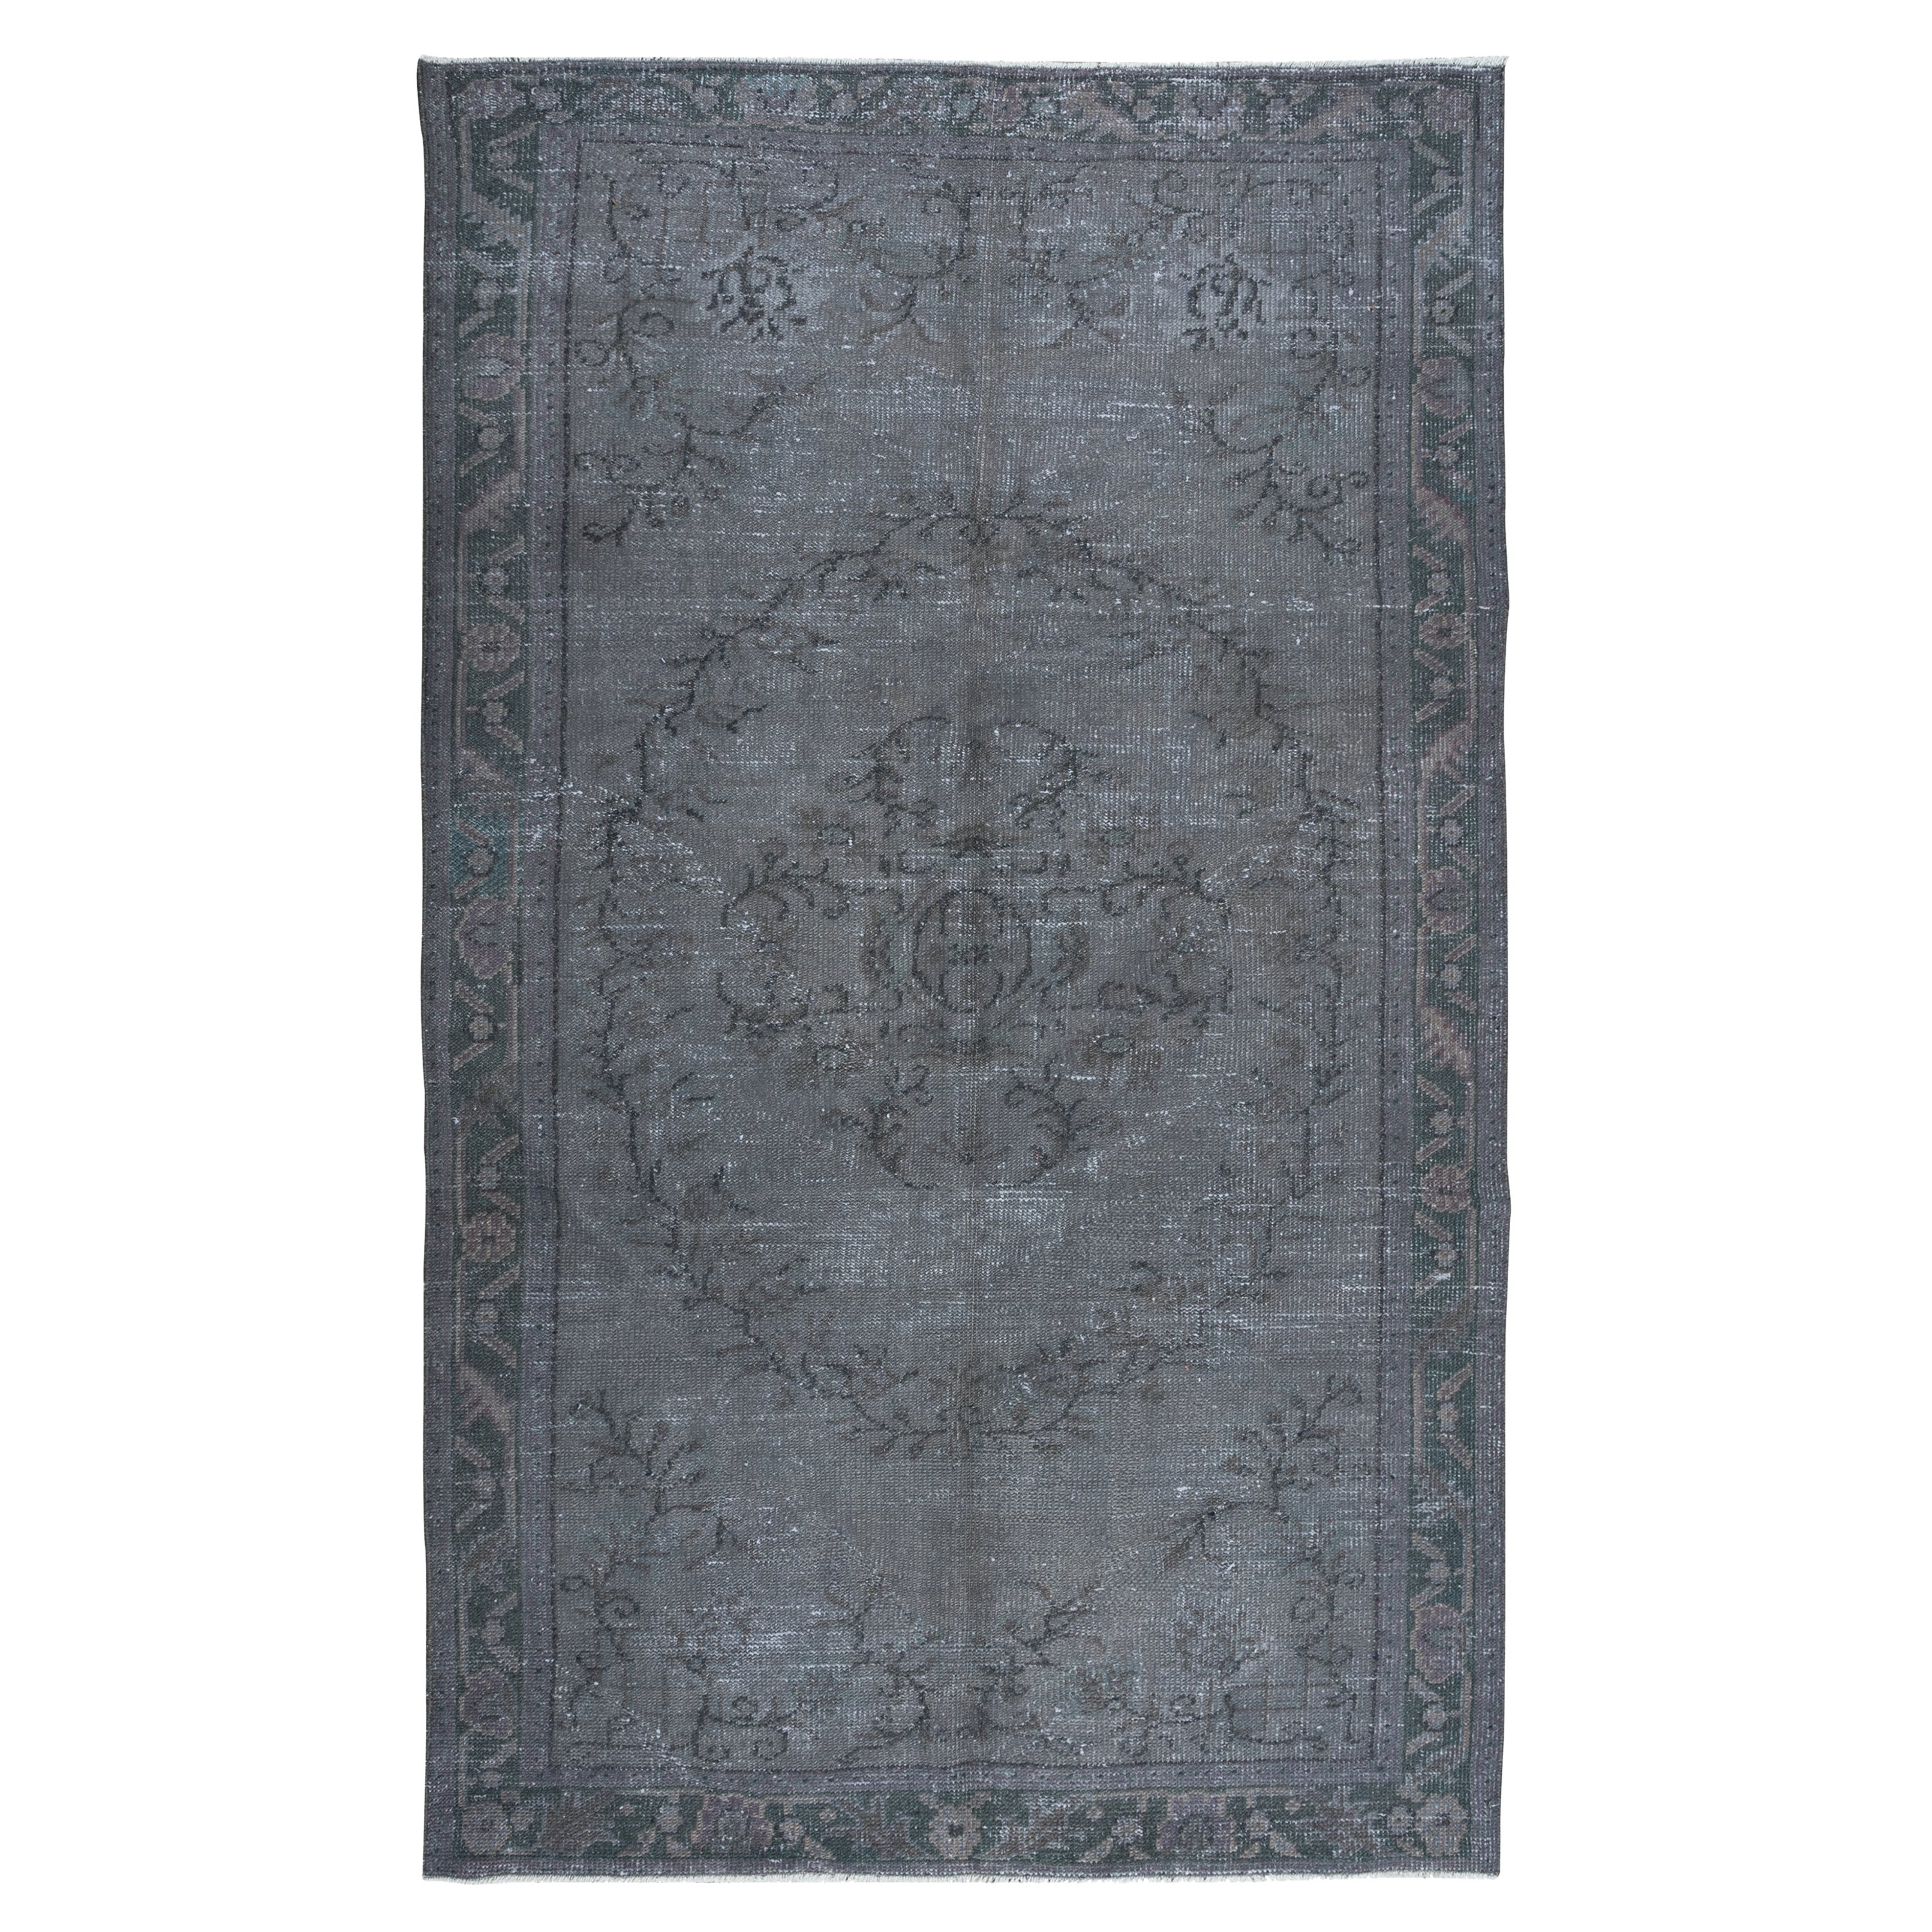 5.4x8.7 Ft Contemporary Hand Knotted Wool Gray Area Rug, Turkish Upcycled Carpet For Sale